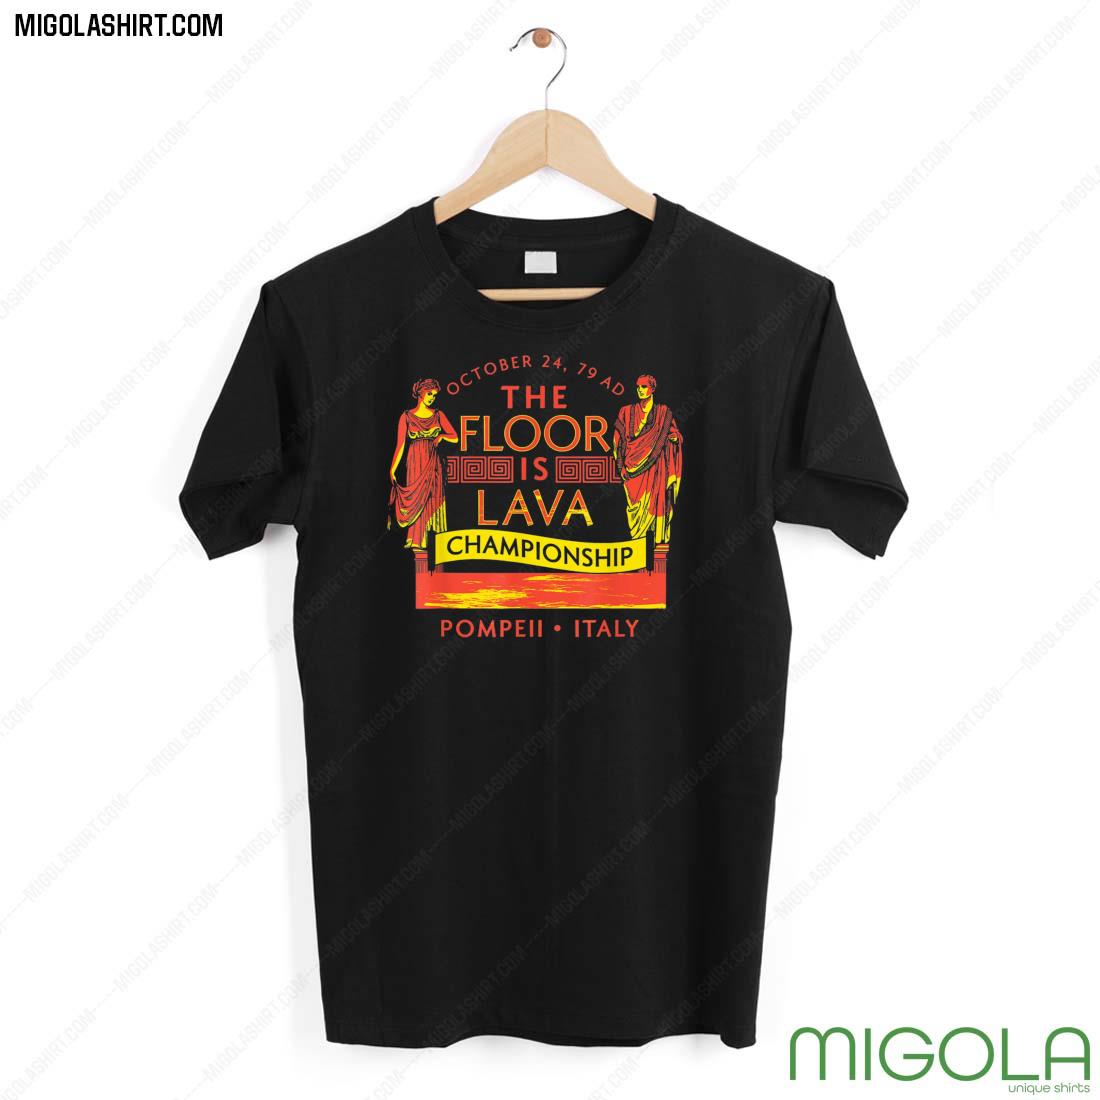 Pompeii Floor Is Lava Championship Natural Disaster Italy Shirt